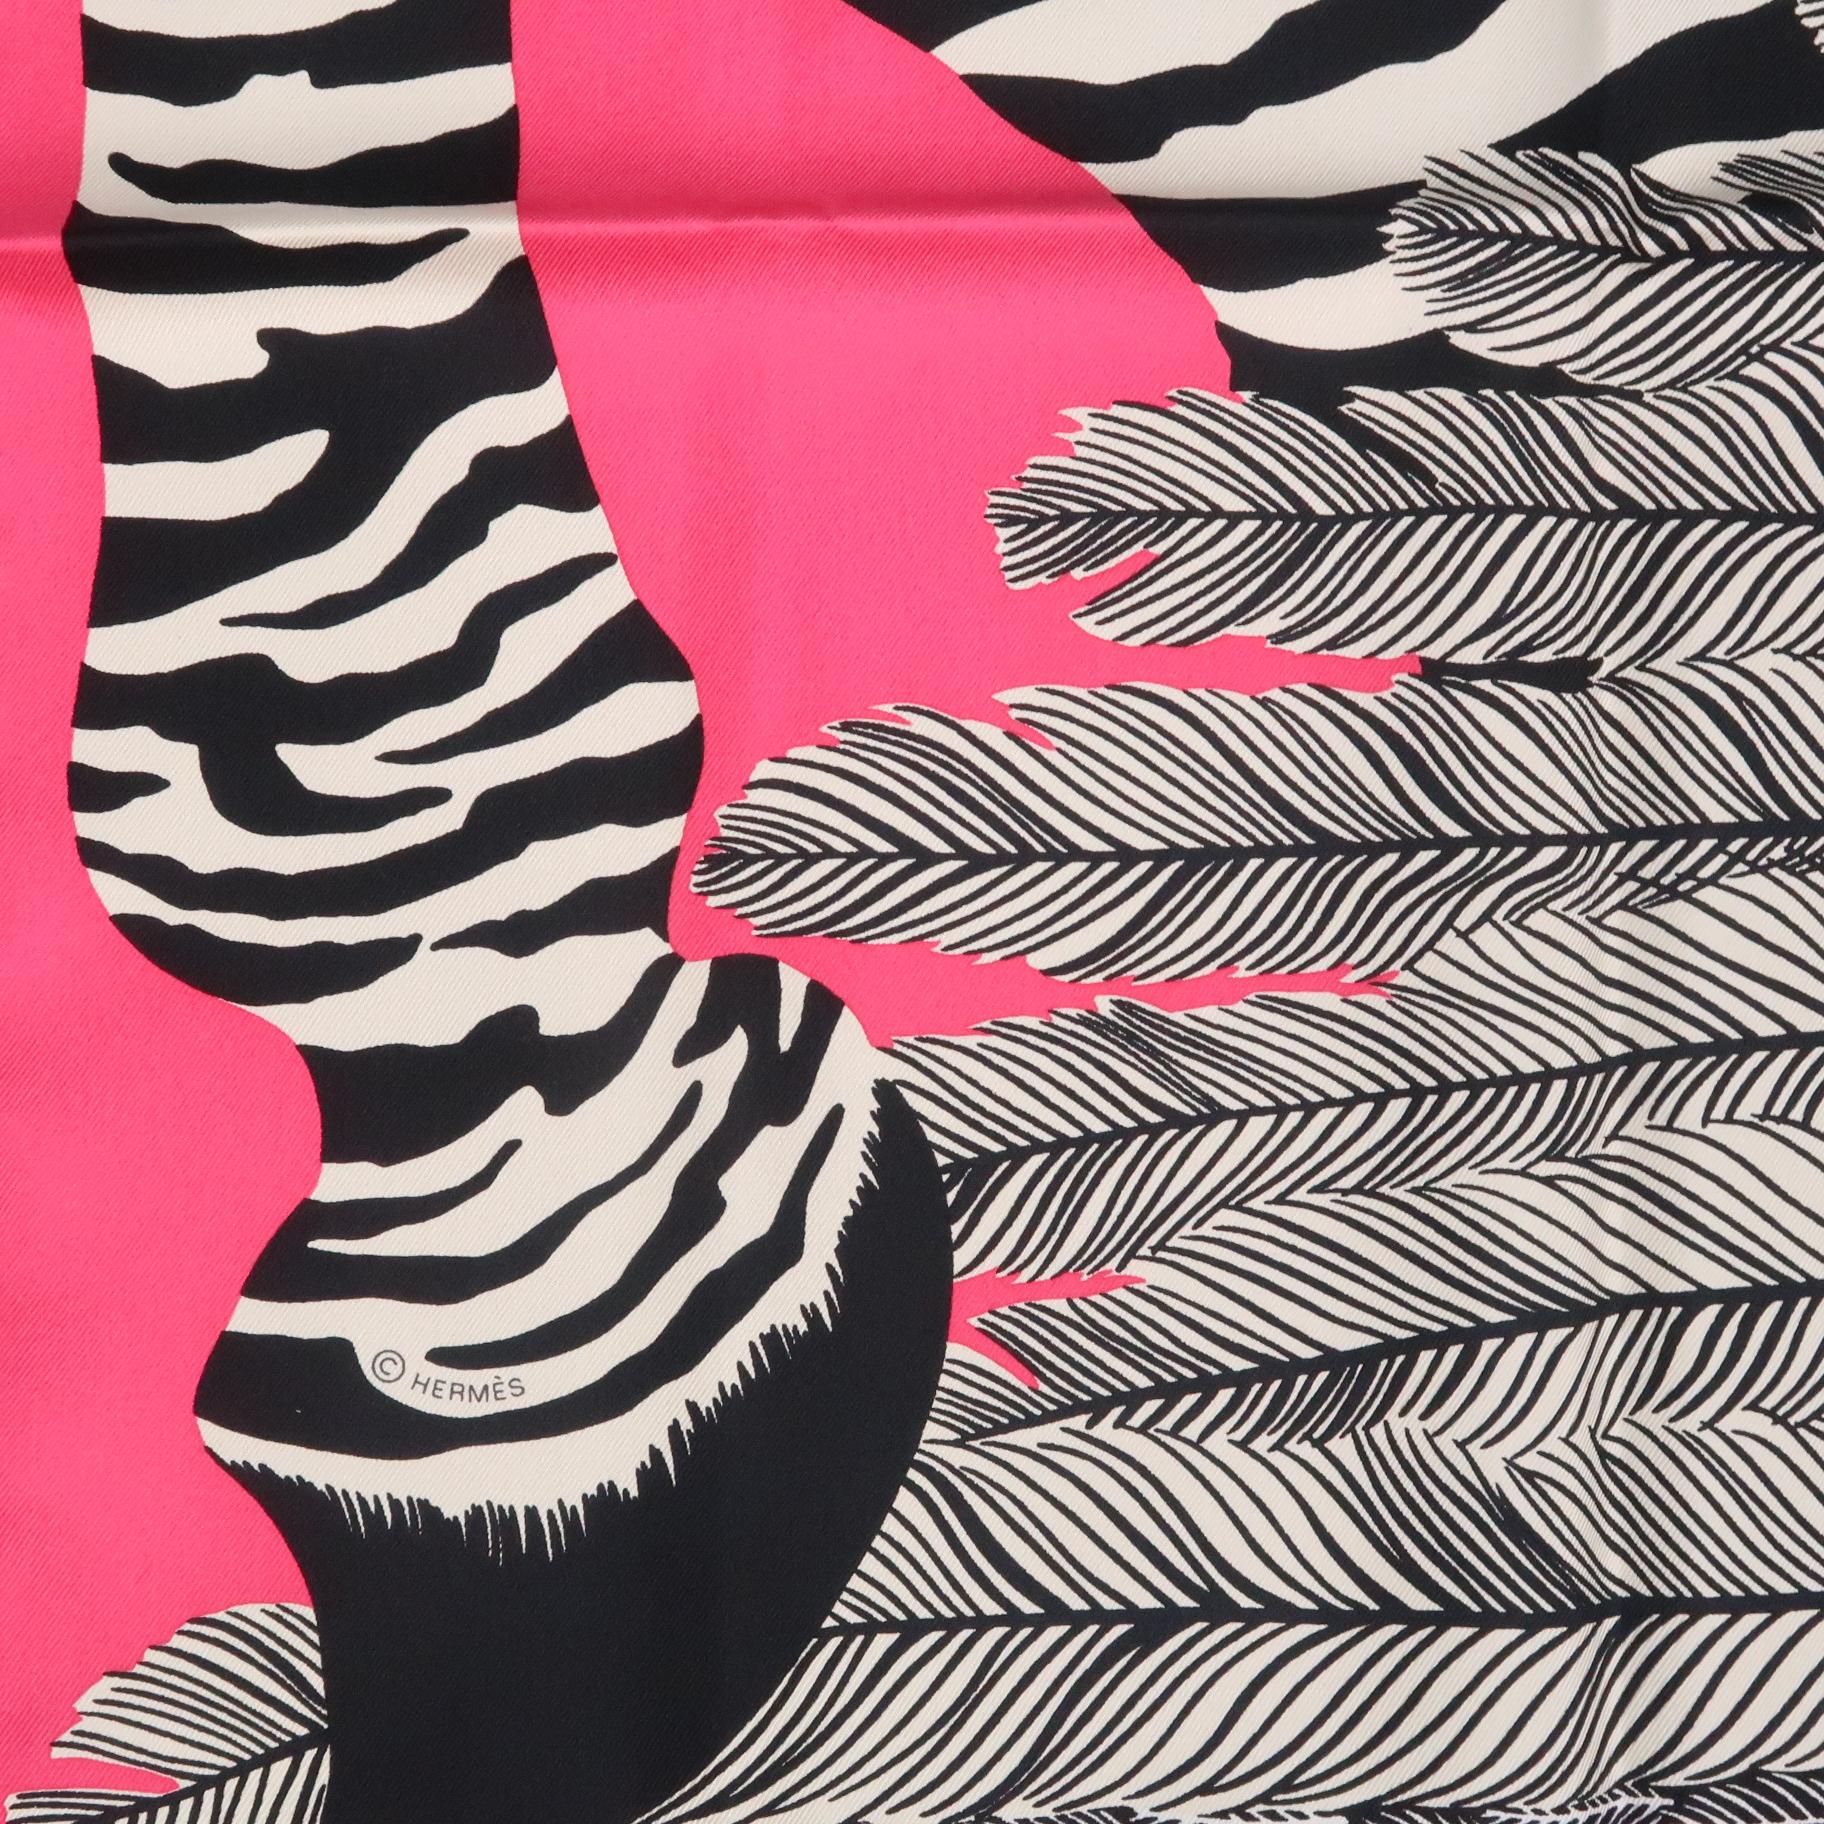 HERMES scarf comes in hot pink silk twill with black and white Zebra Pegasus graphic print. Made in France. Sold out.
 
New with Tags in Original Box.
 
90 x 90 cm.